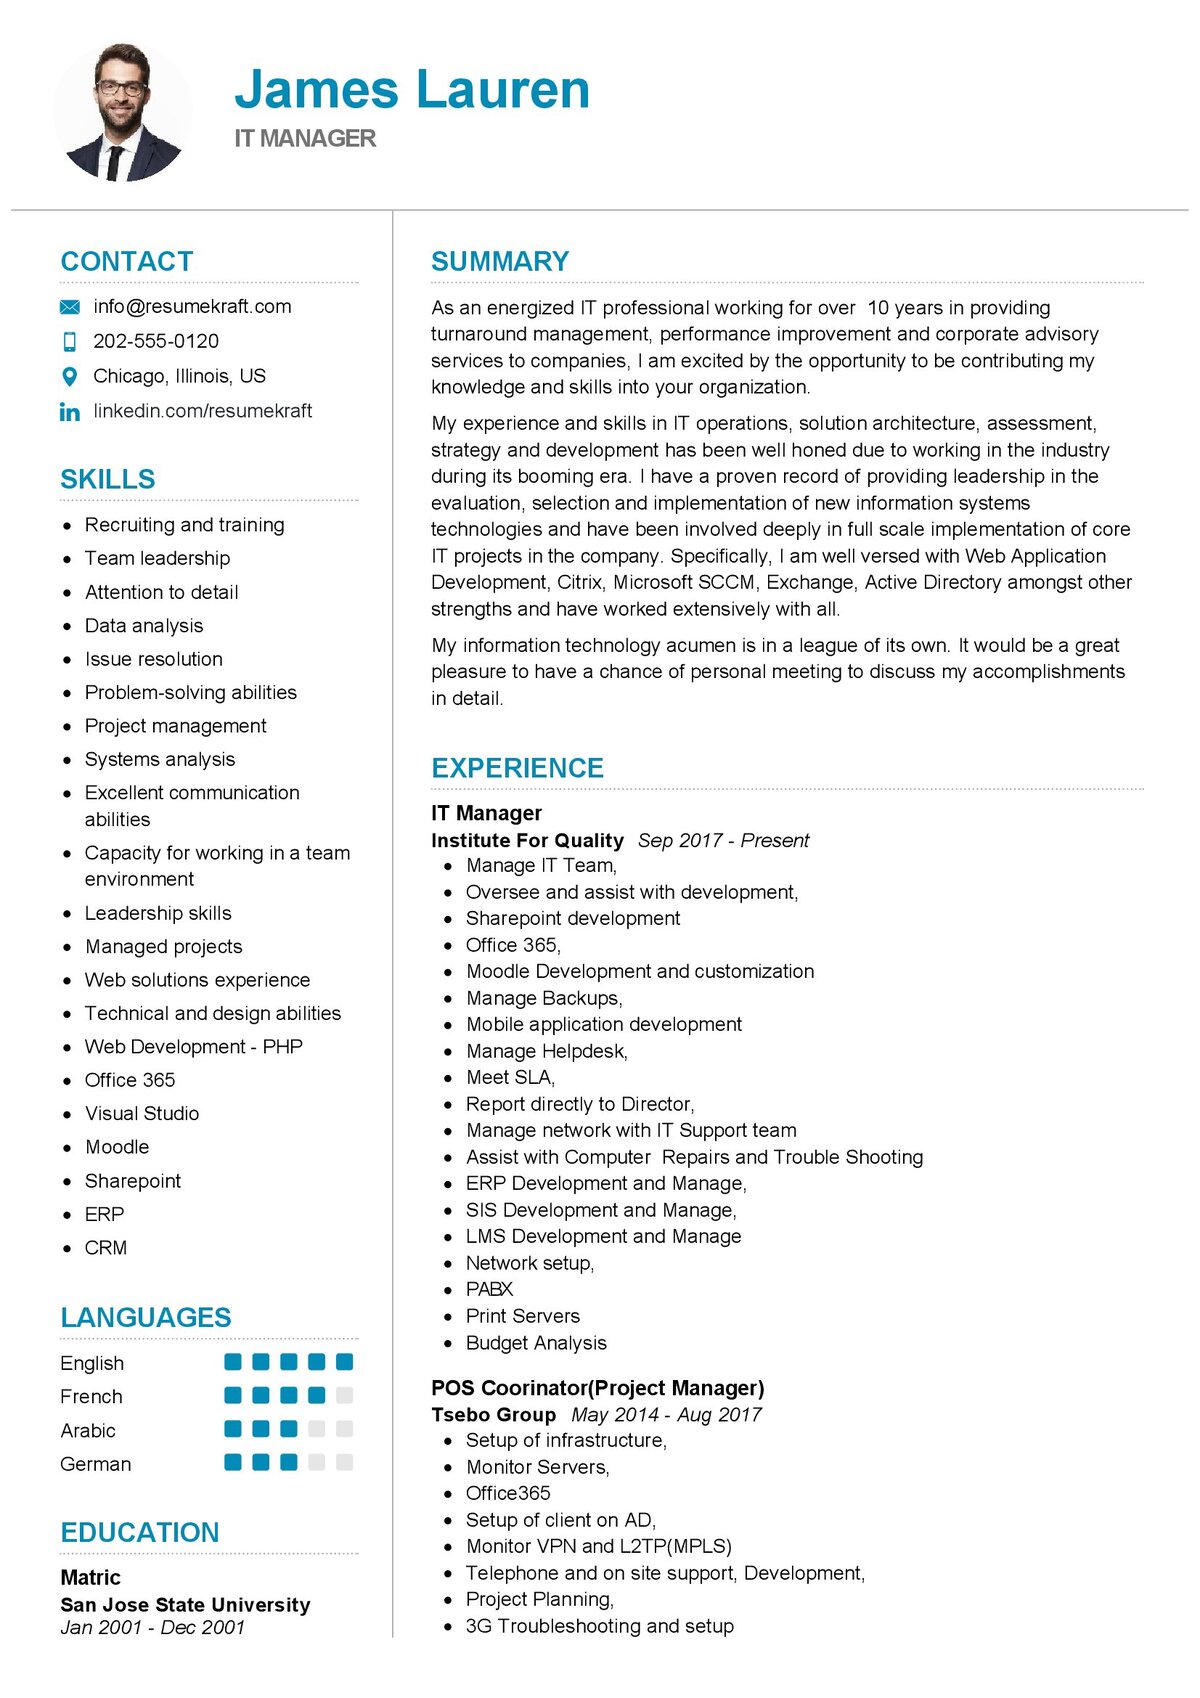 IT Manager Resume Template 